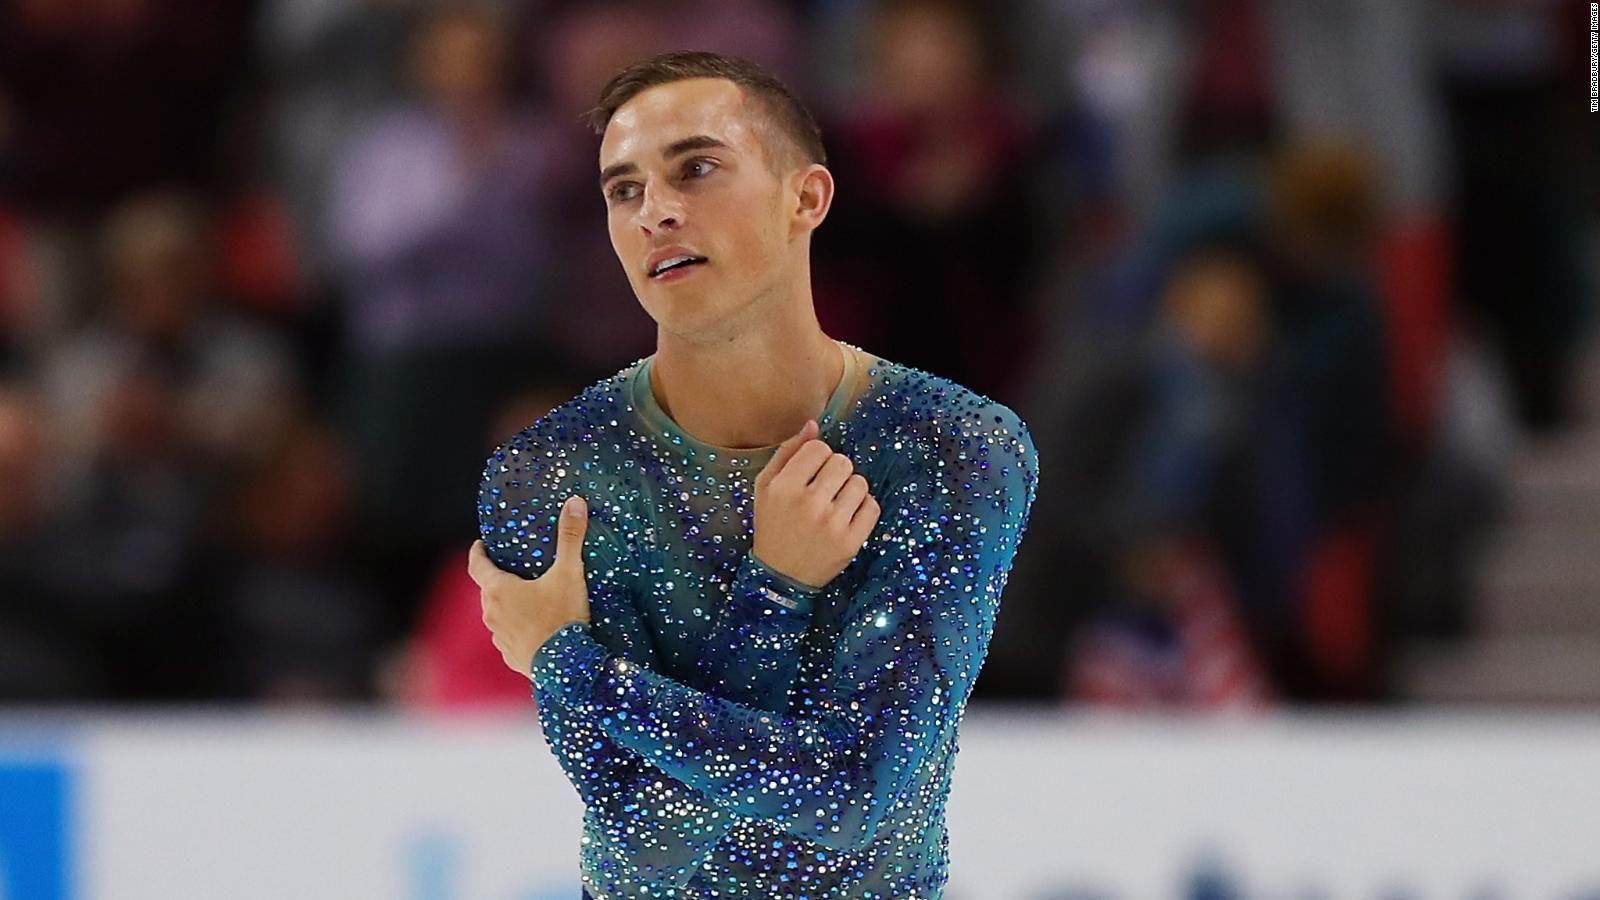 How Adam Rippon plans to win gold